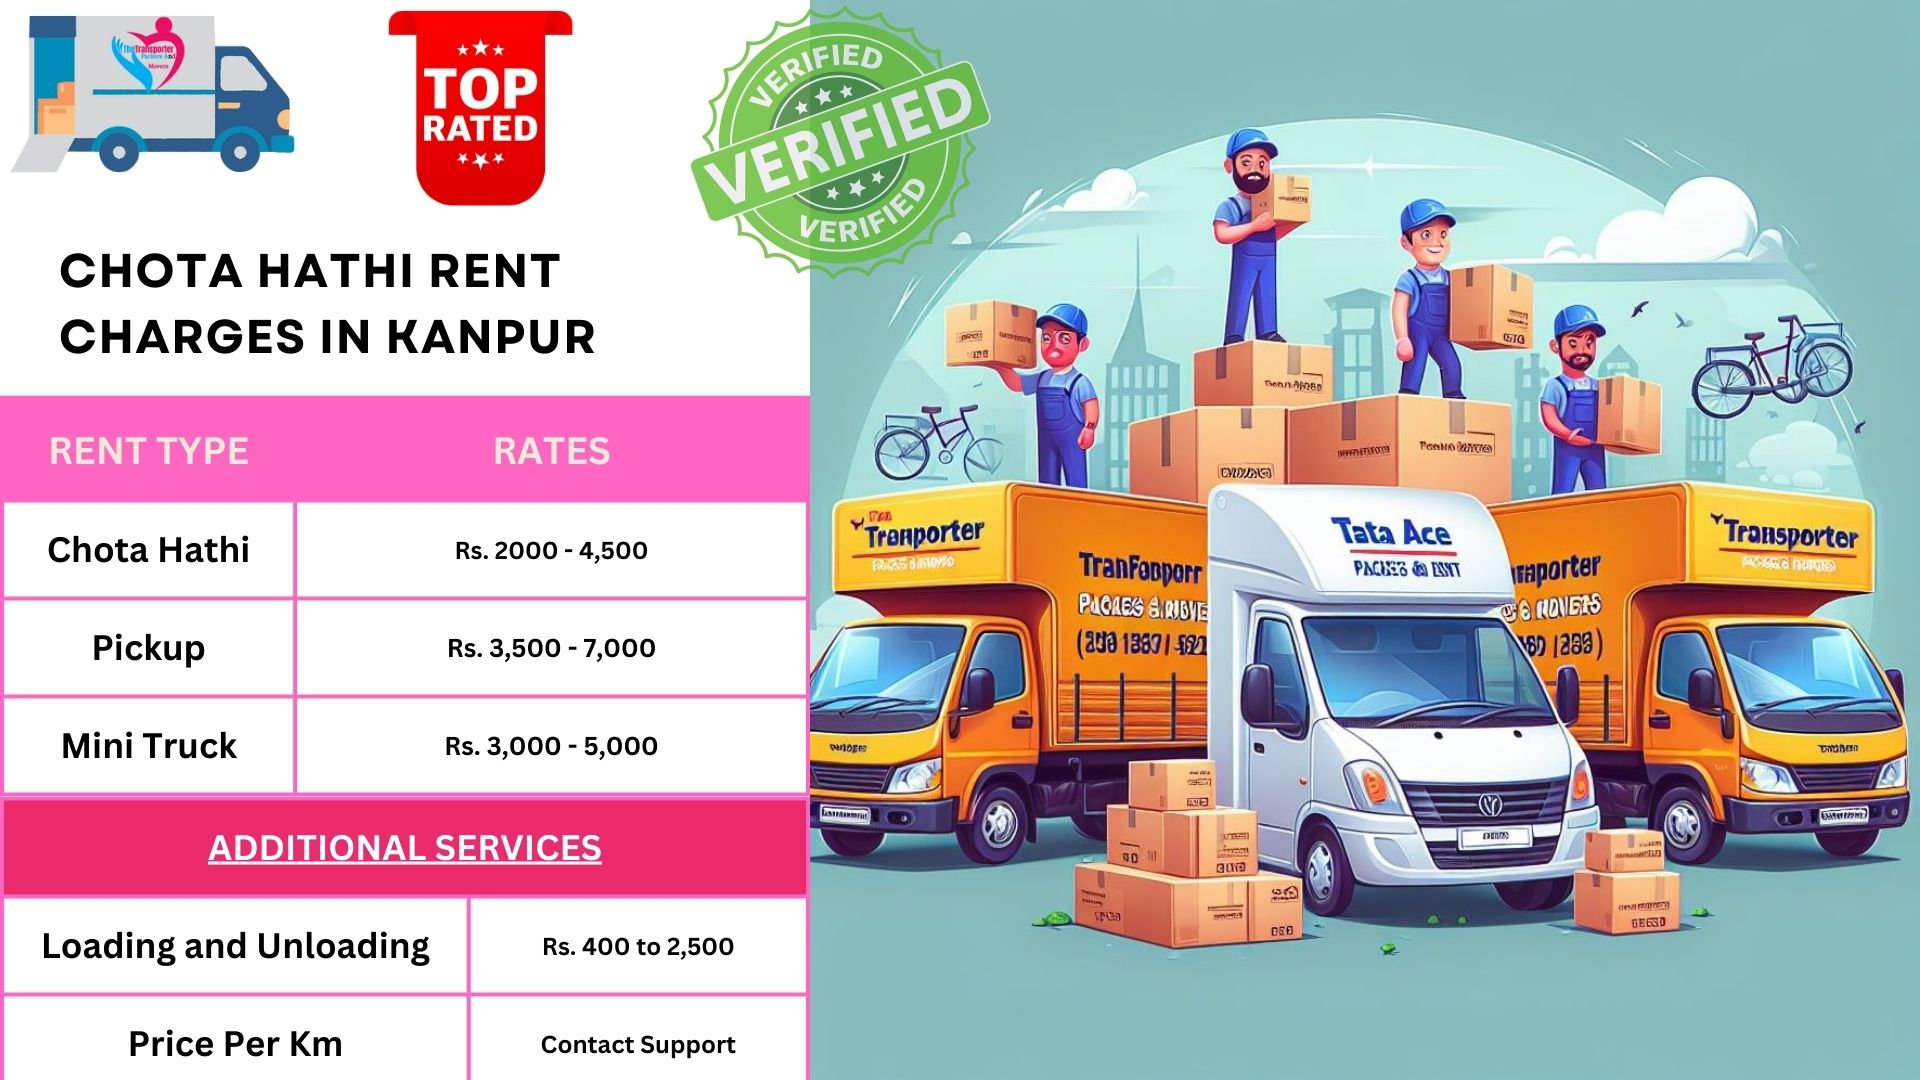 Getting the Best Chota Hathi on Rent in Kanpur